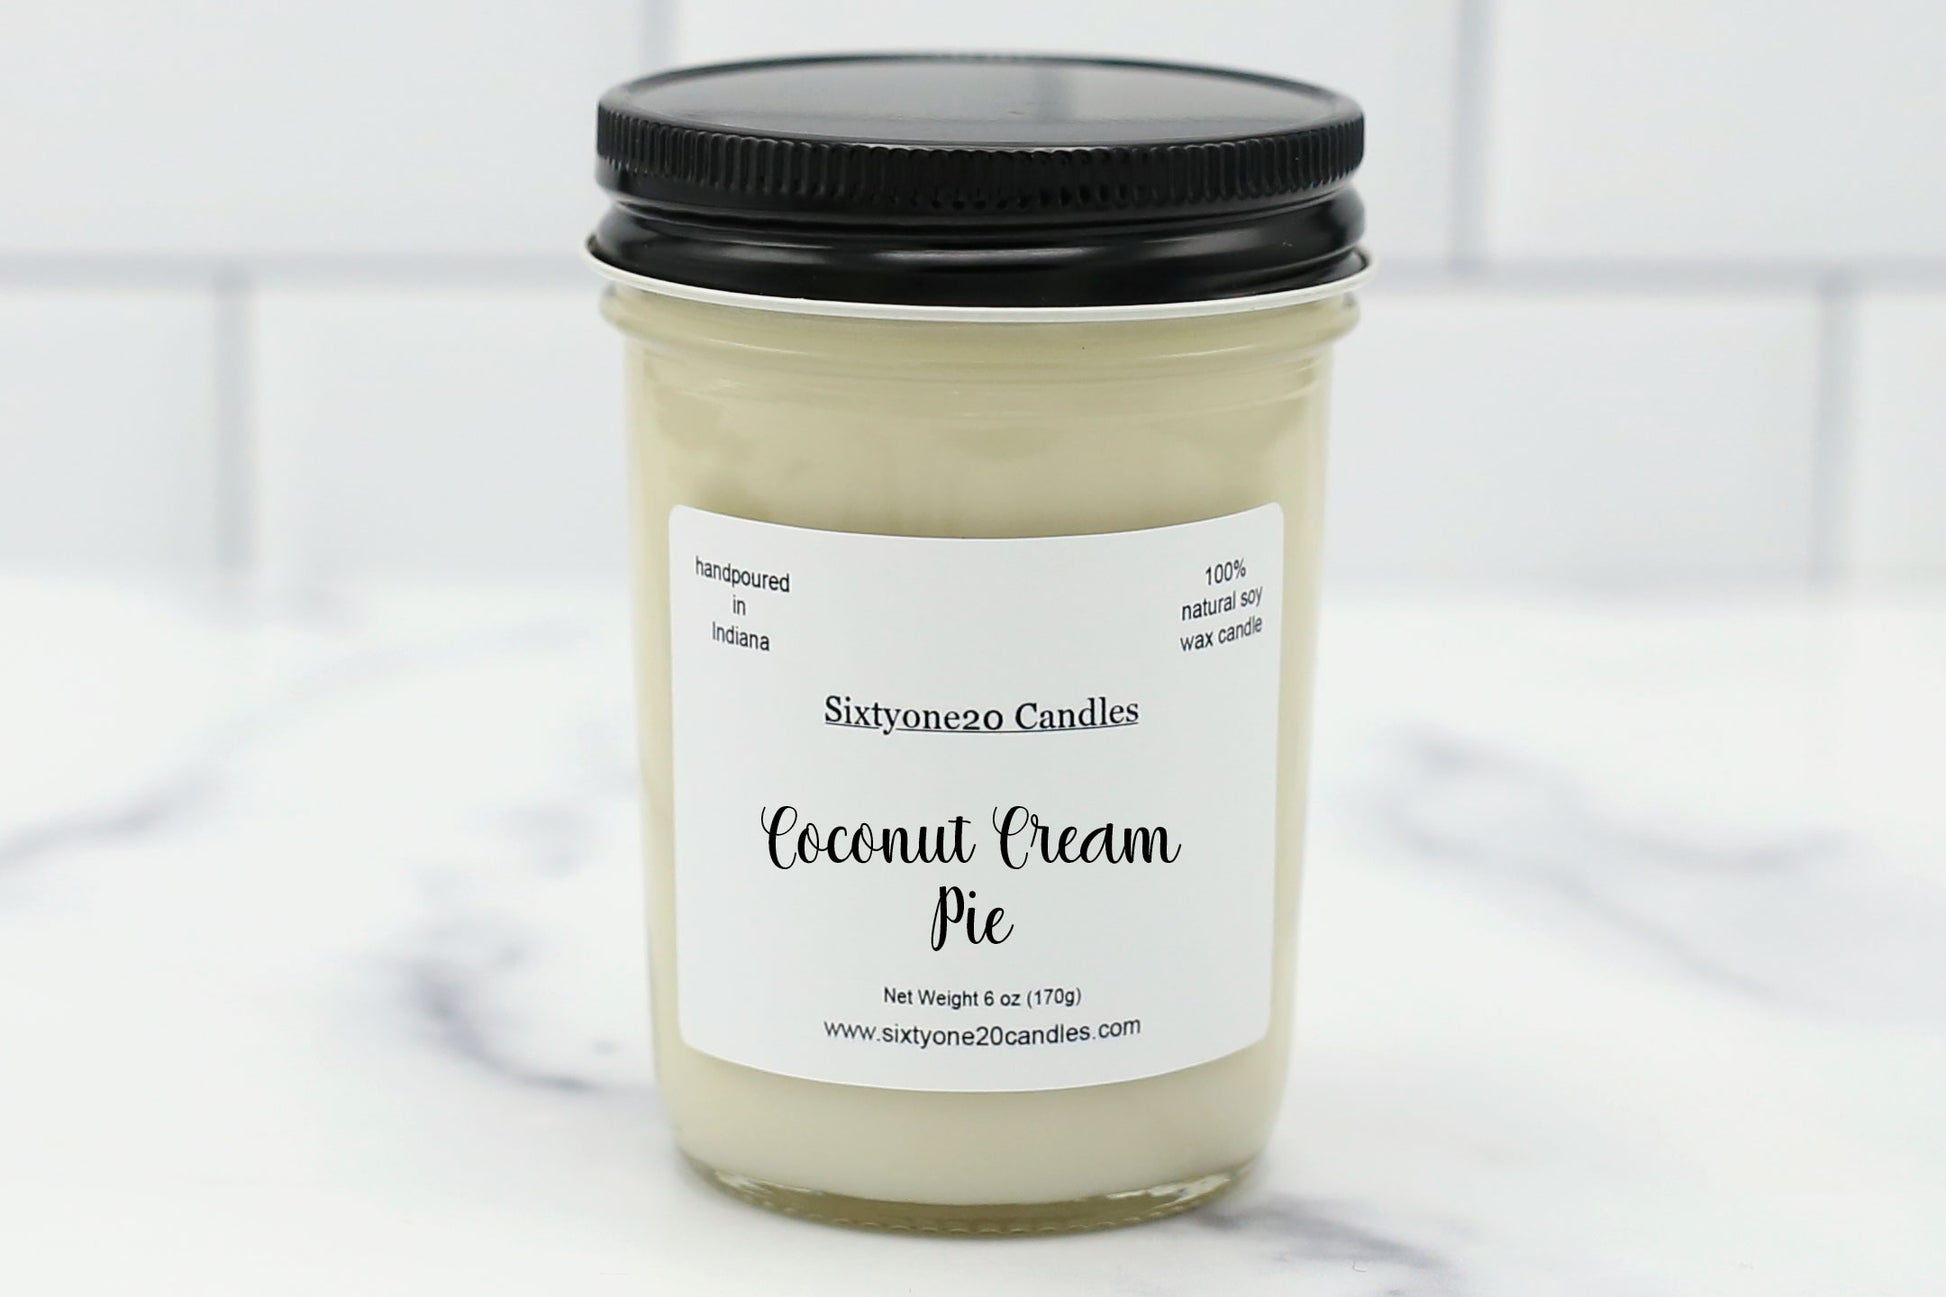 Coconut Cream Pie 100% soy wax candle